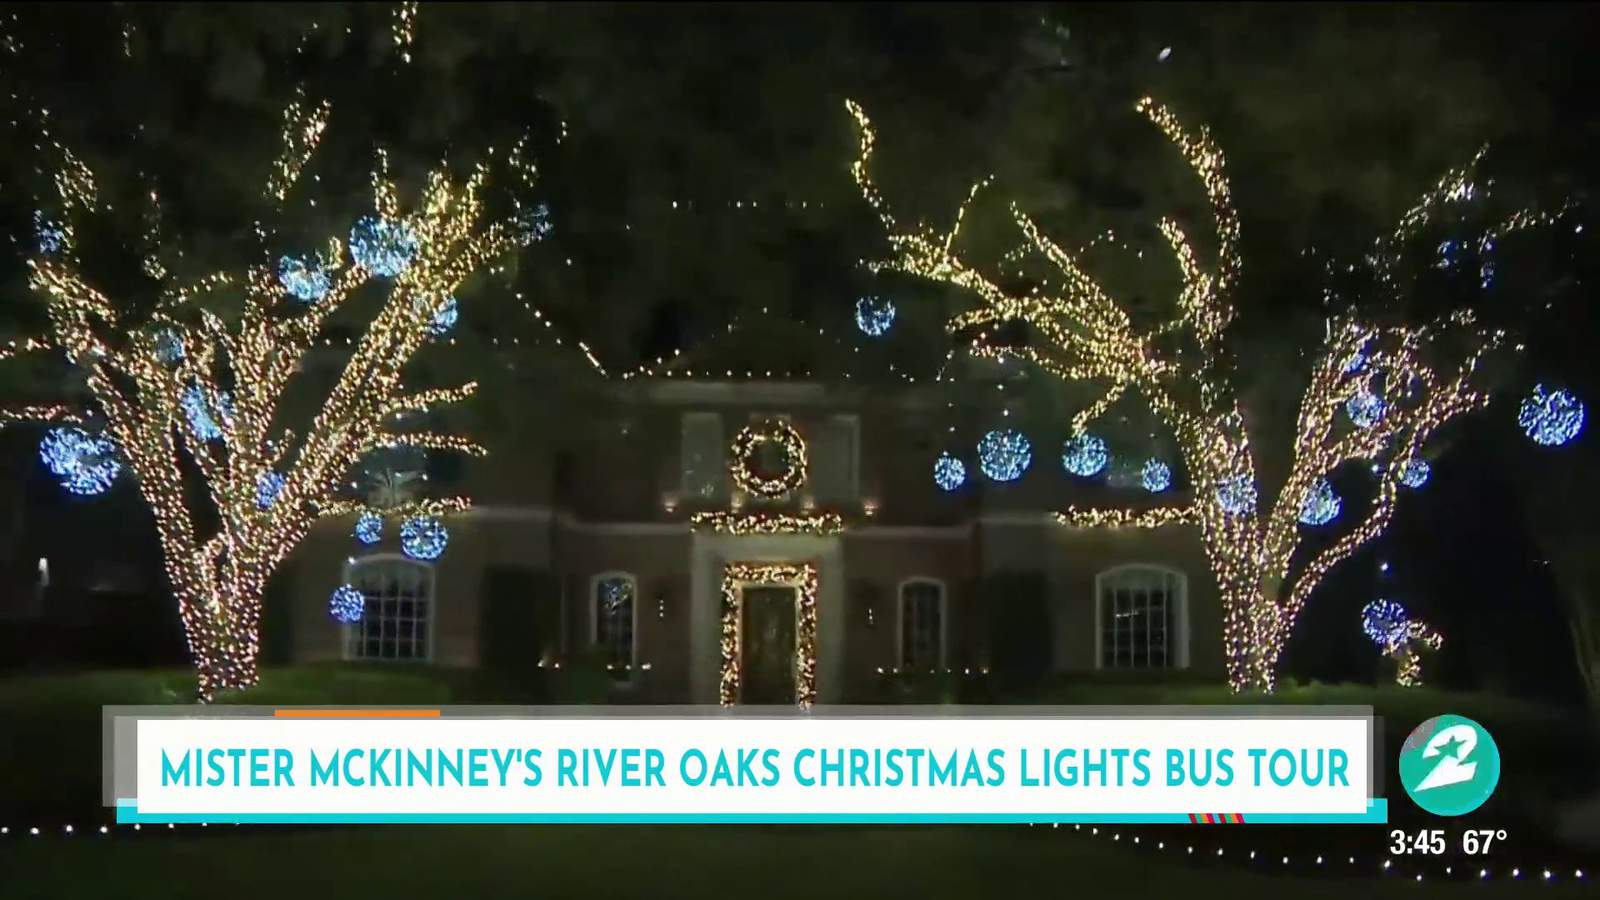 All aboard! This school bus tours Houston’s River Oaks spectacular Christmas lights display